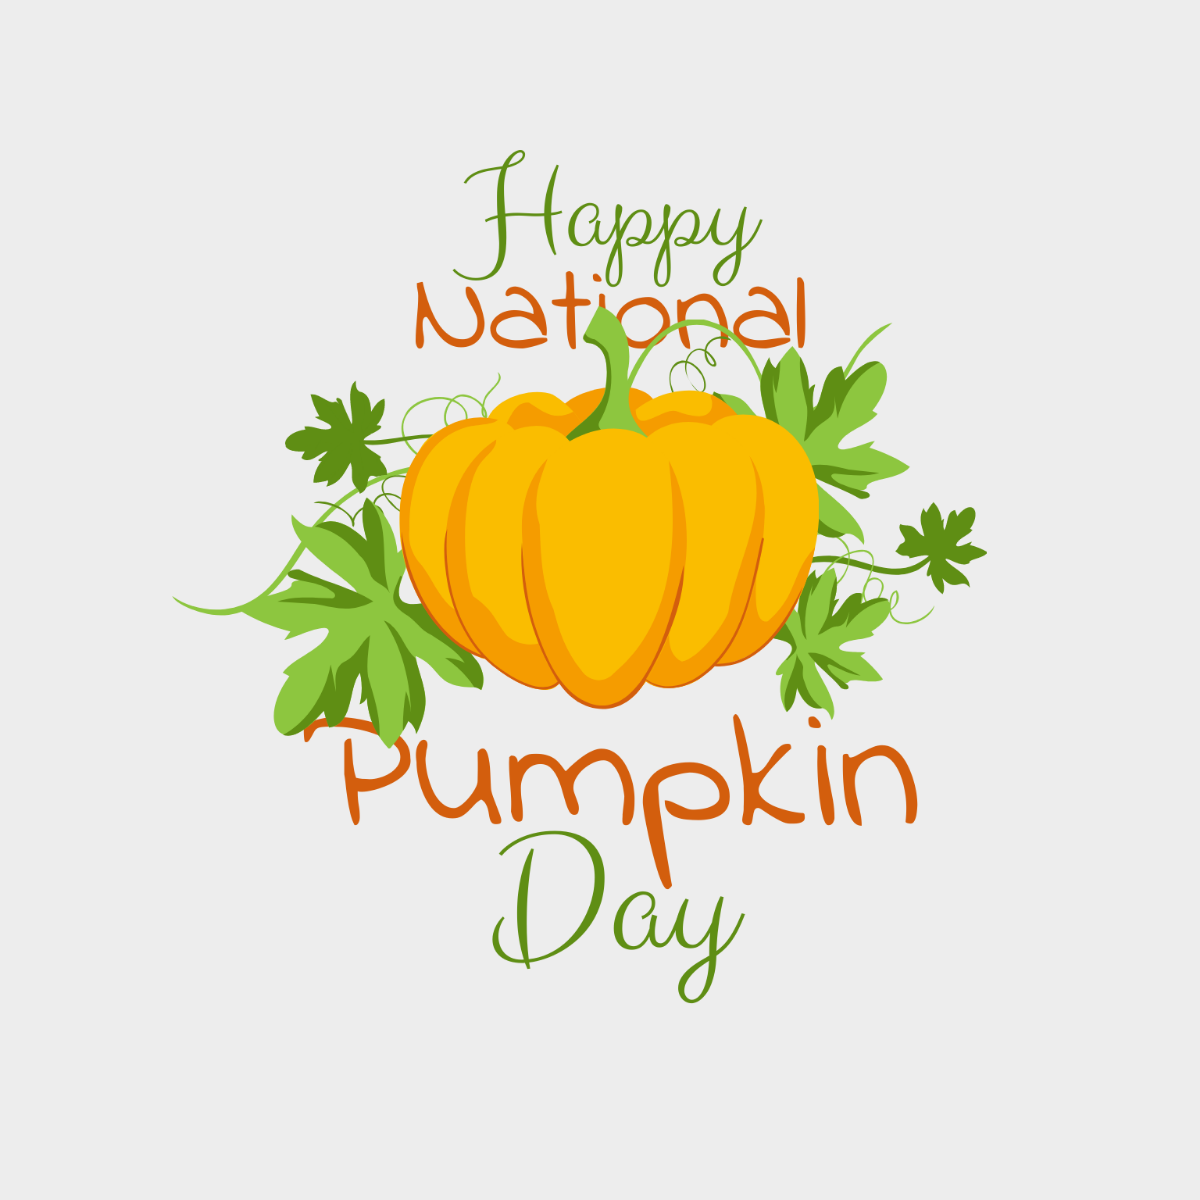 Free Happy National Pumpkin Day Illustration Template